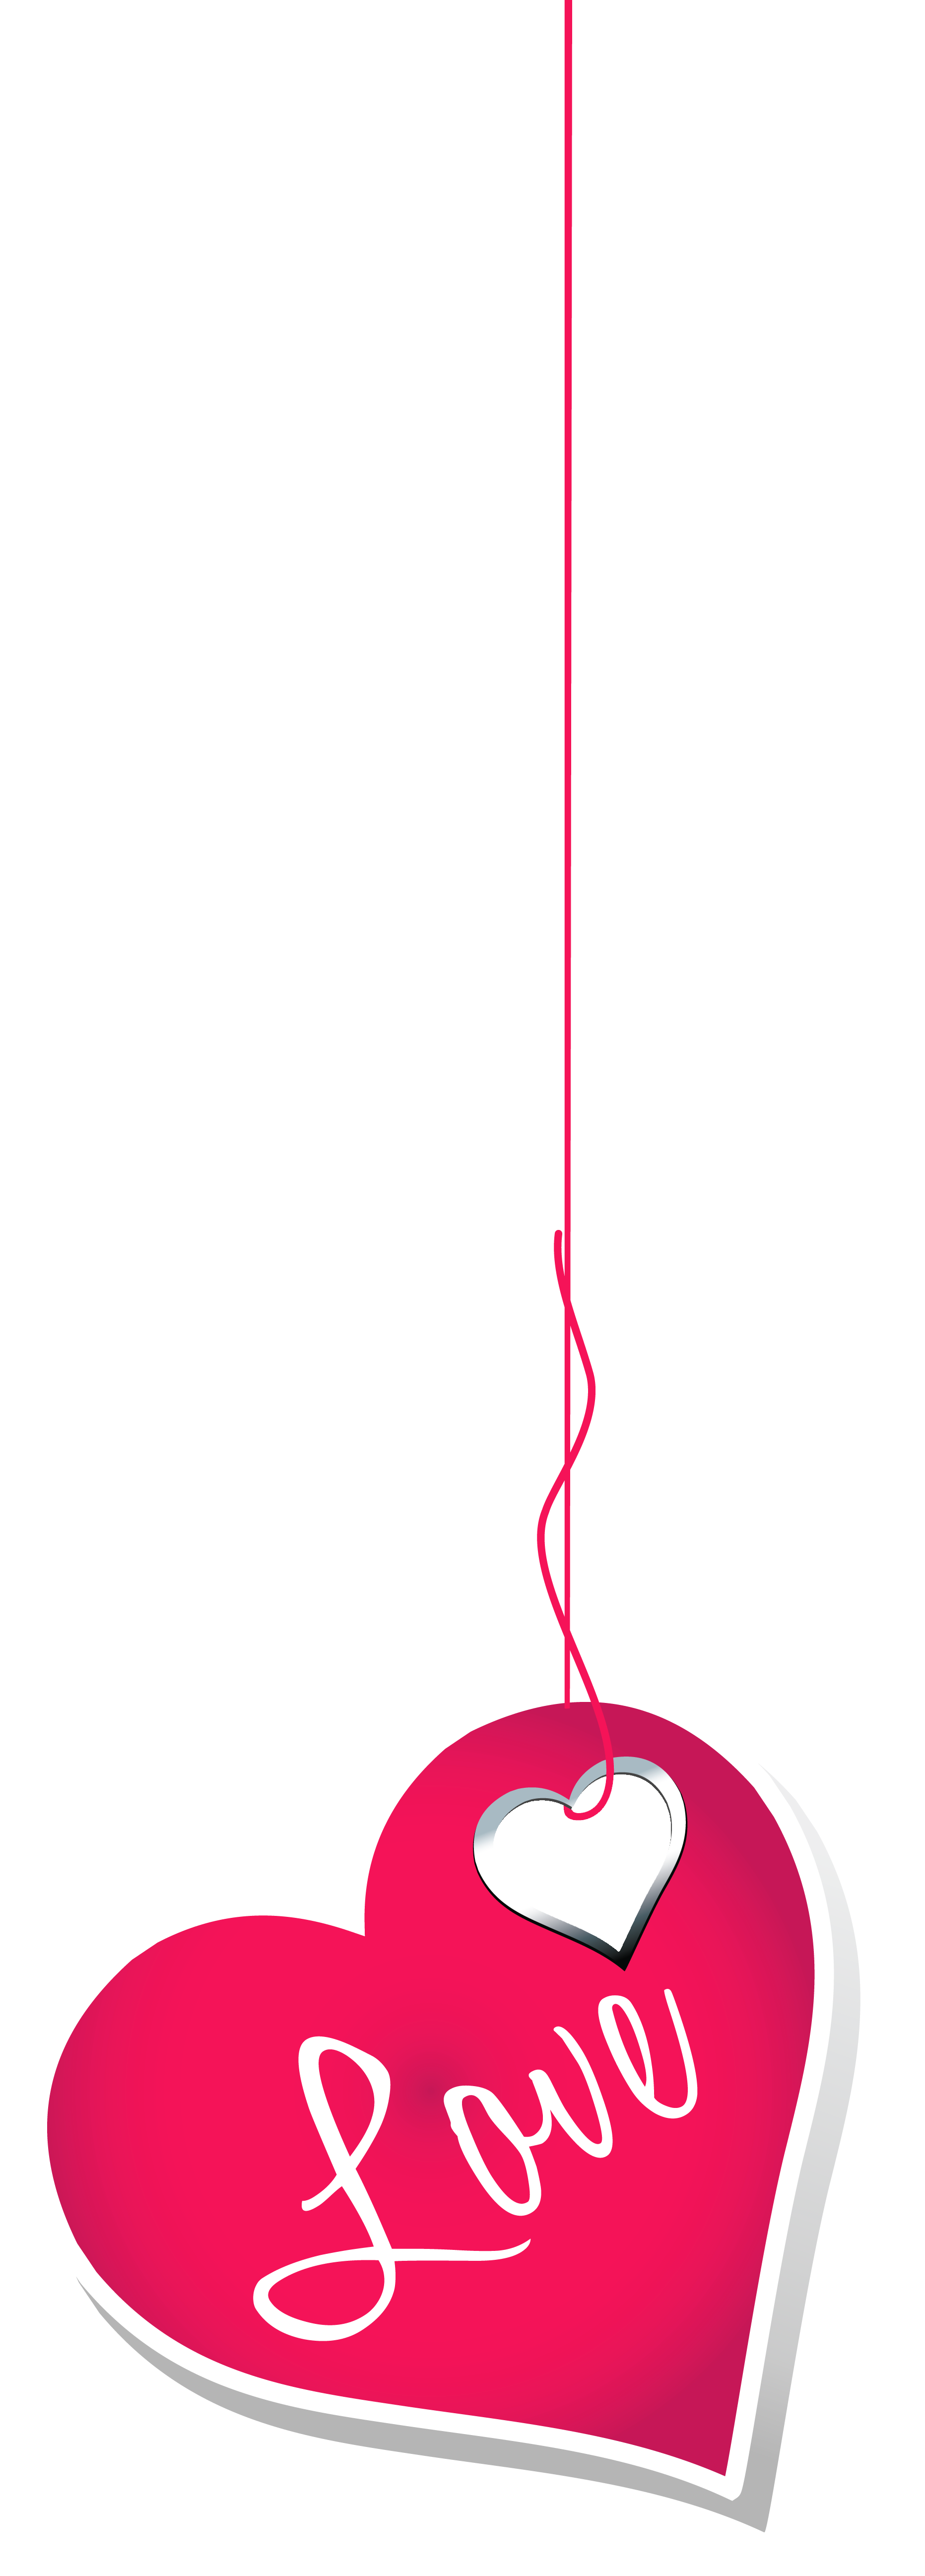 Clipart designs red. Hanging pink love heart